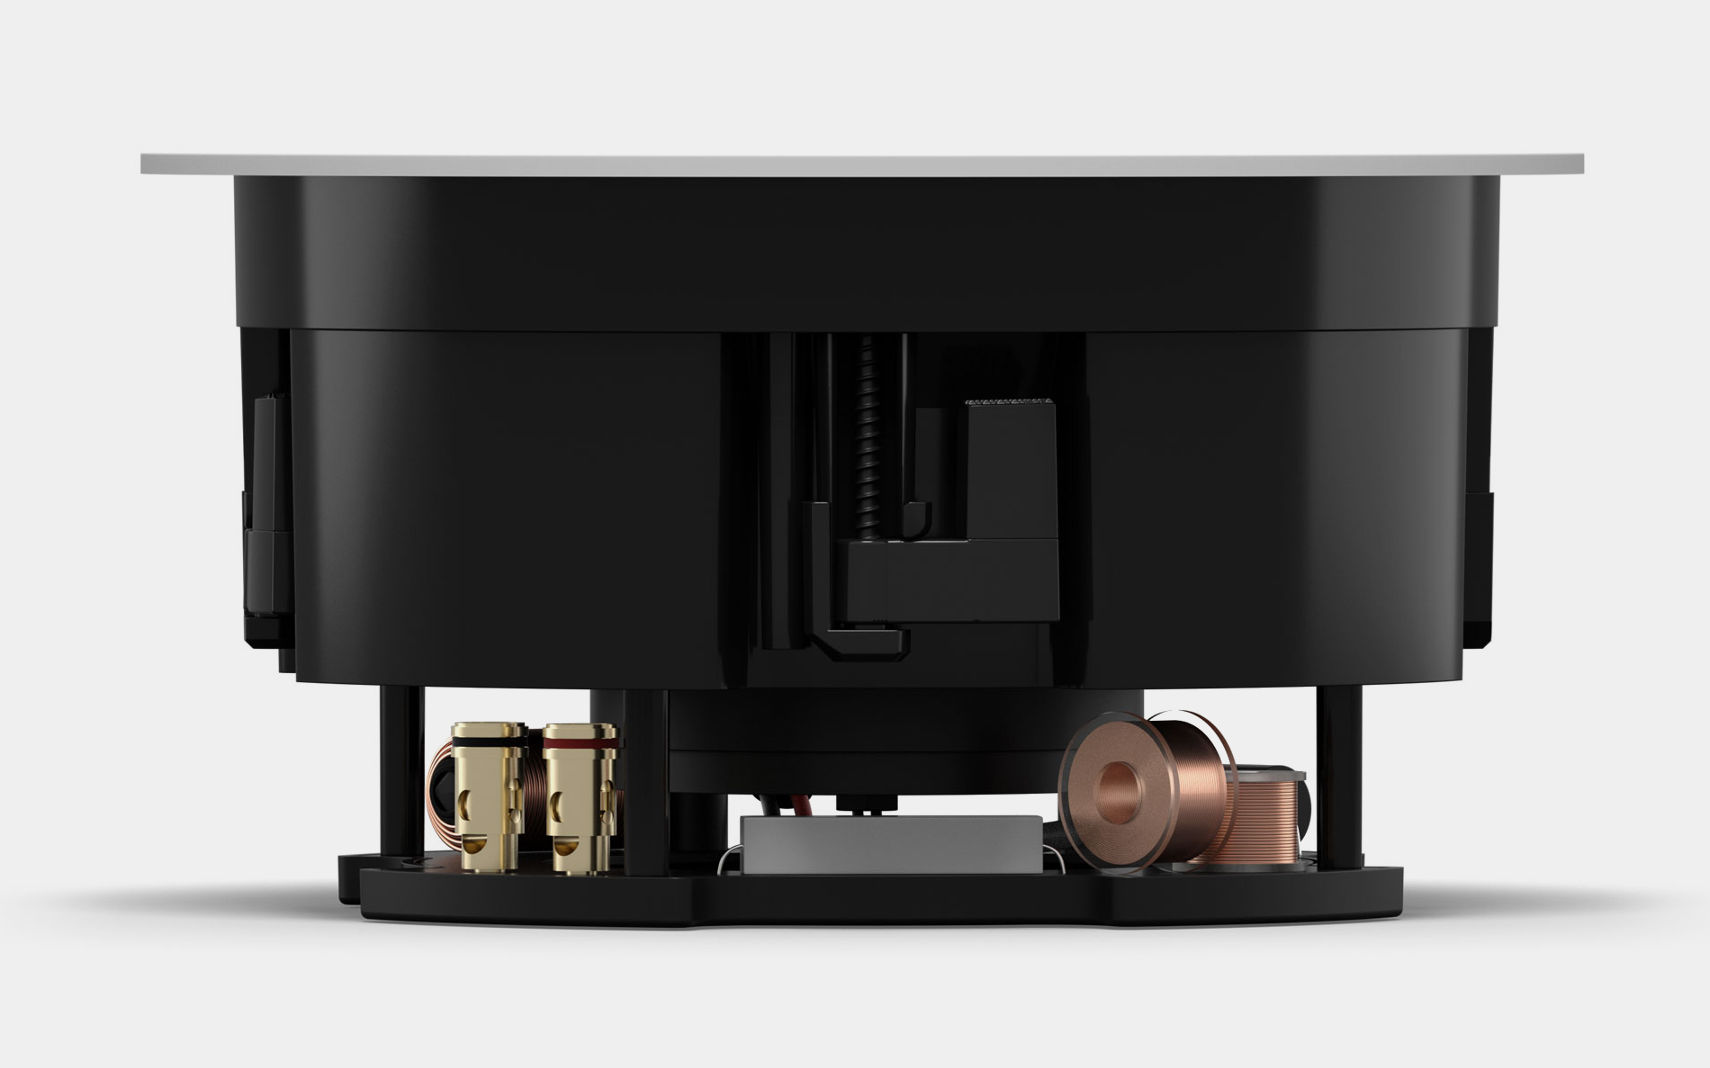 Sonos by Sonance Architectural Speakers